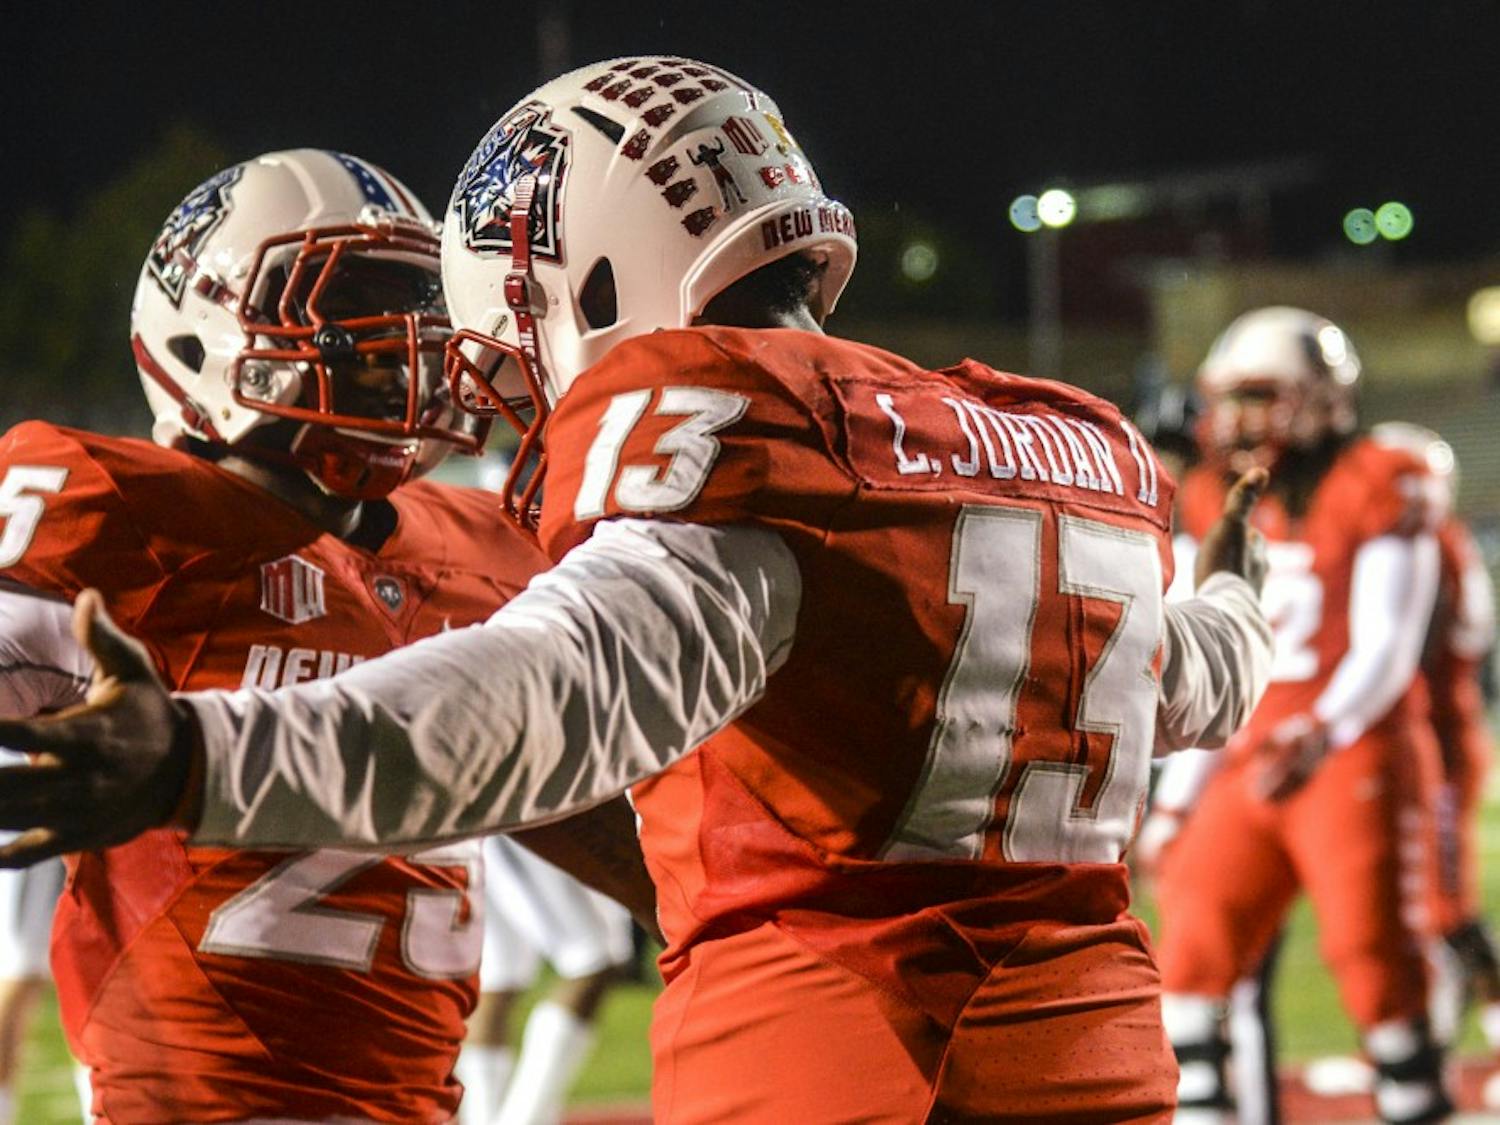 Senior Quarterback Lamar Jordan embraces a teammate after a touchdown against Nevada on Nov. 5, 2016. The UNM football team was named ?one of the most entertaining teams to watch? by Matt Brown of sportsonearth.com. 